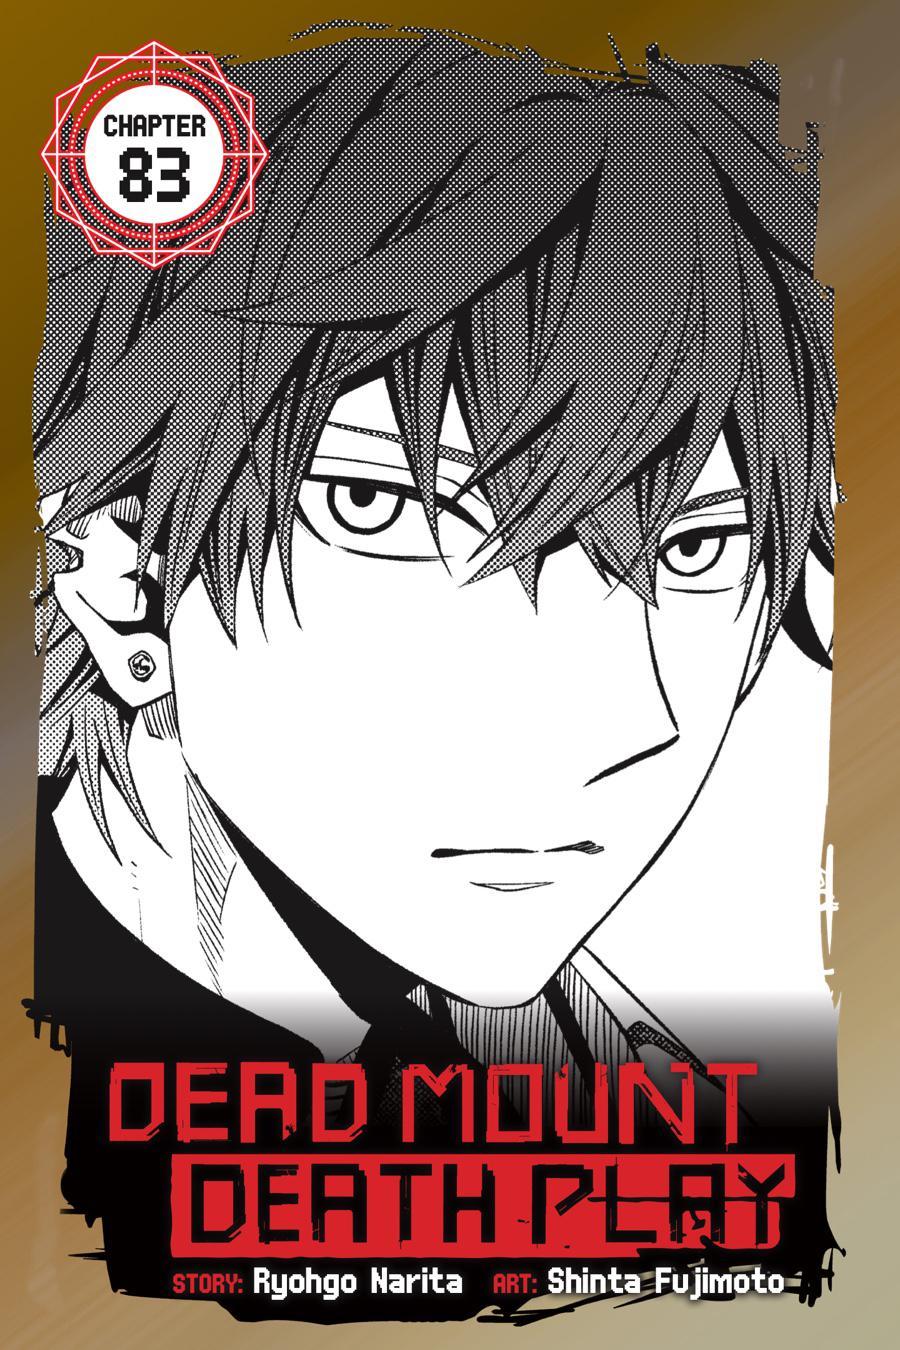 Dead Mount Death Play, Chapter 94 by Ryohgo Narita